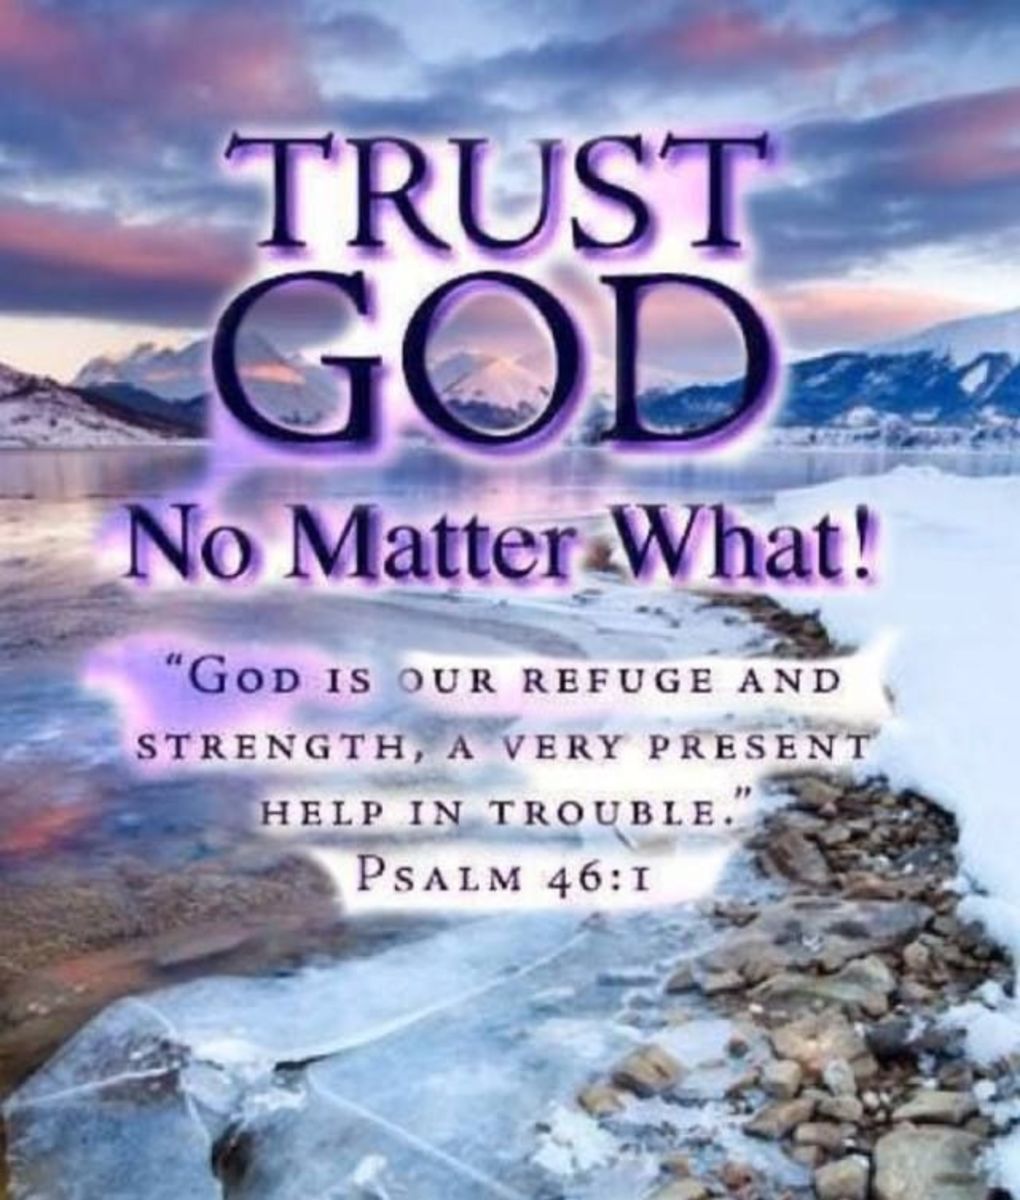 httphubpagescomhubthe-journey-from-doubt-to-faith-trusting-god-no-matter-what